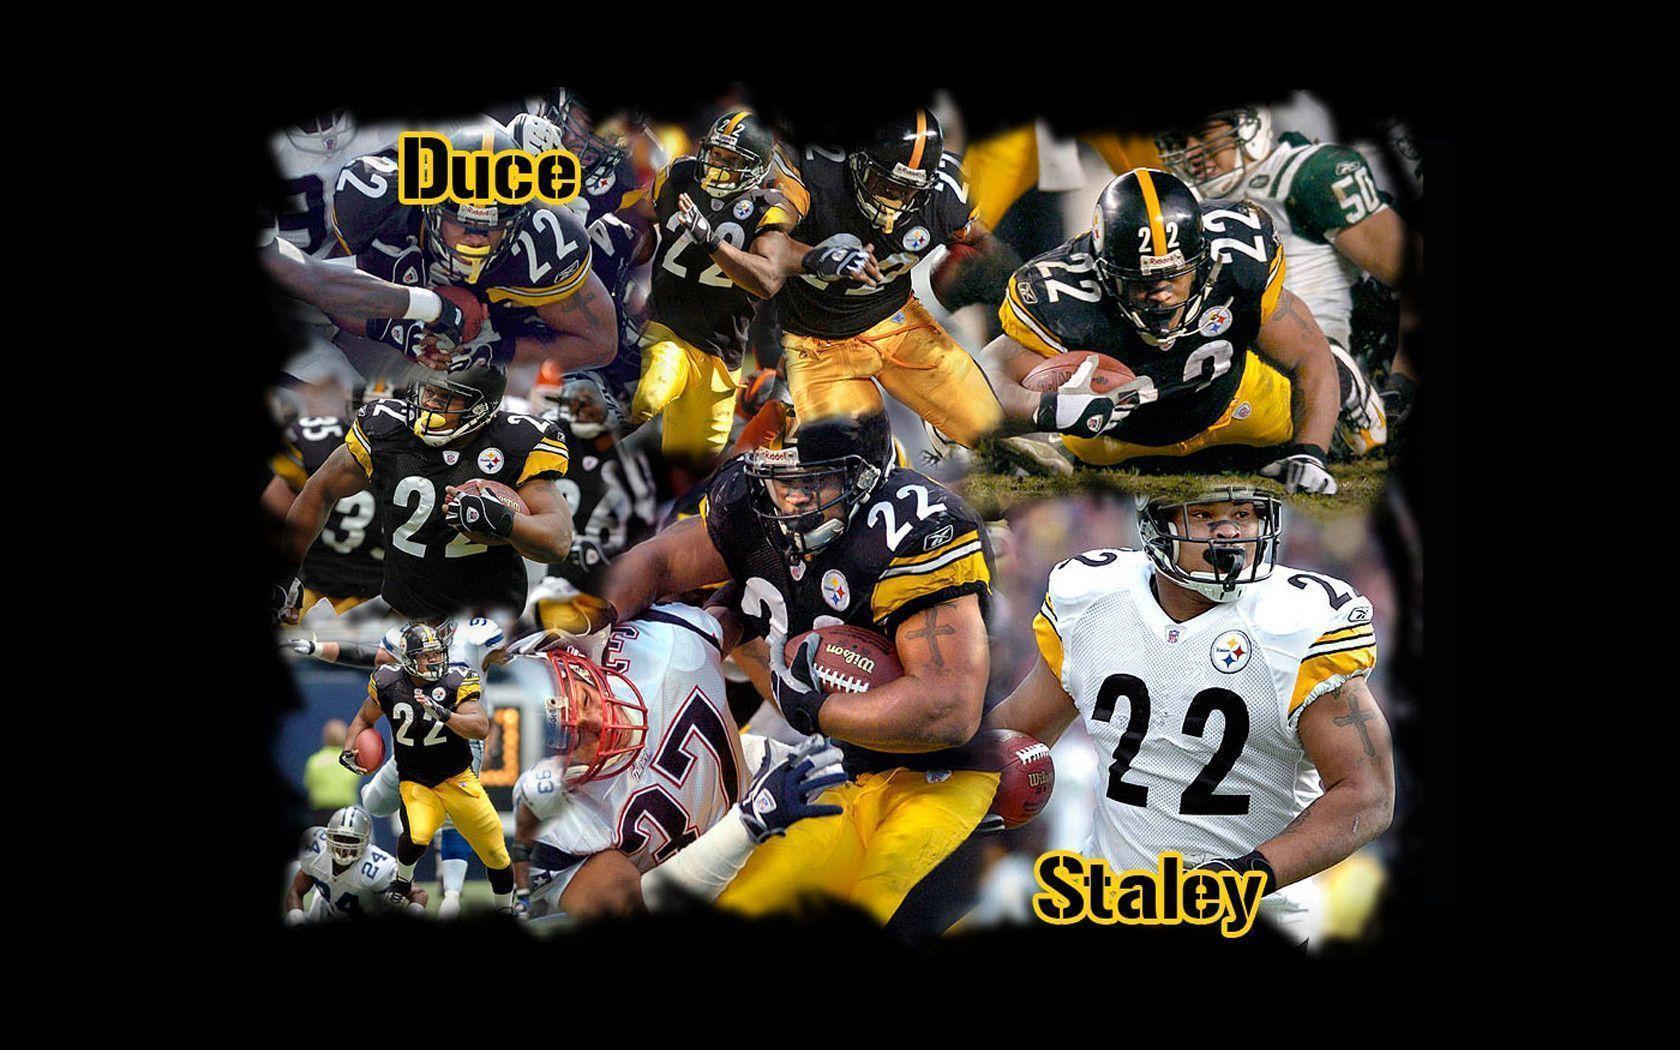 Awesome Pittsburgh Steelers wallpaper. Pittsburgh Steelers wallpaper